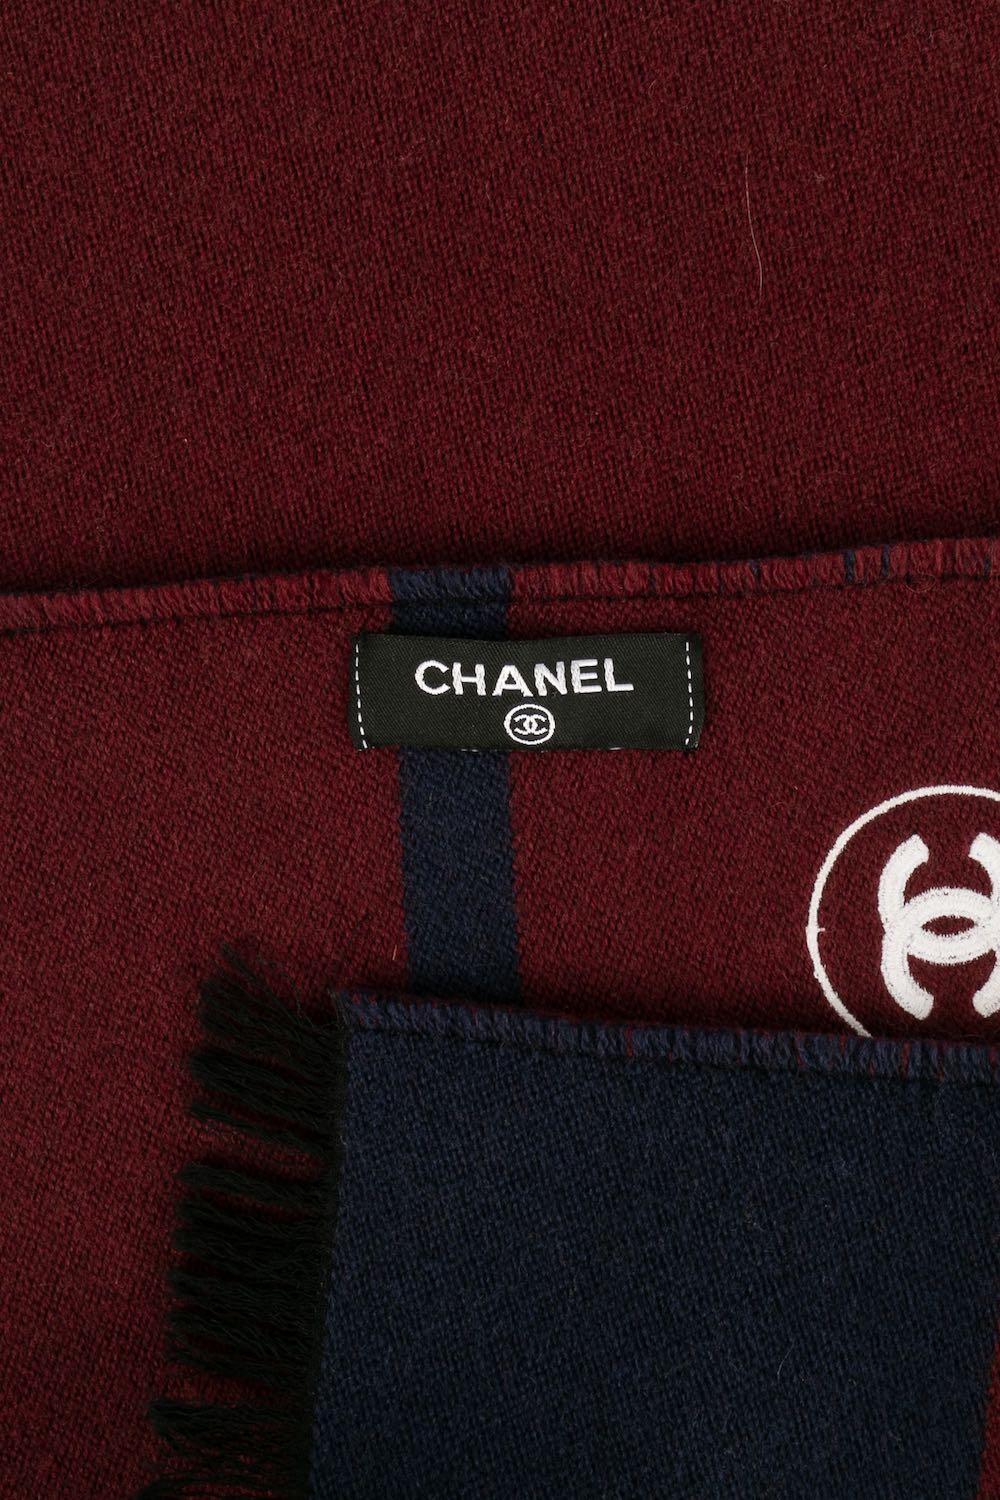 Chanel Long Cashmere Scarf in Burgundy and Blue 4